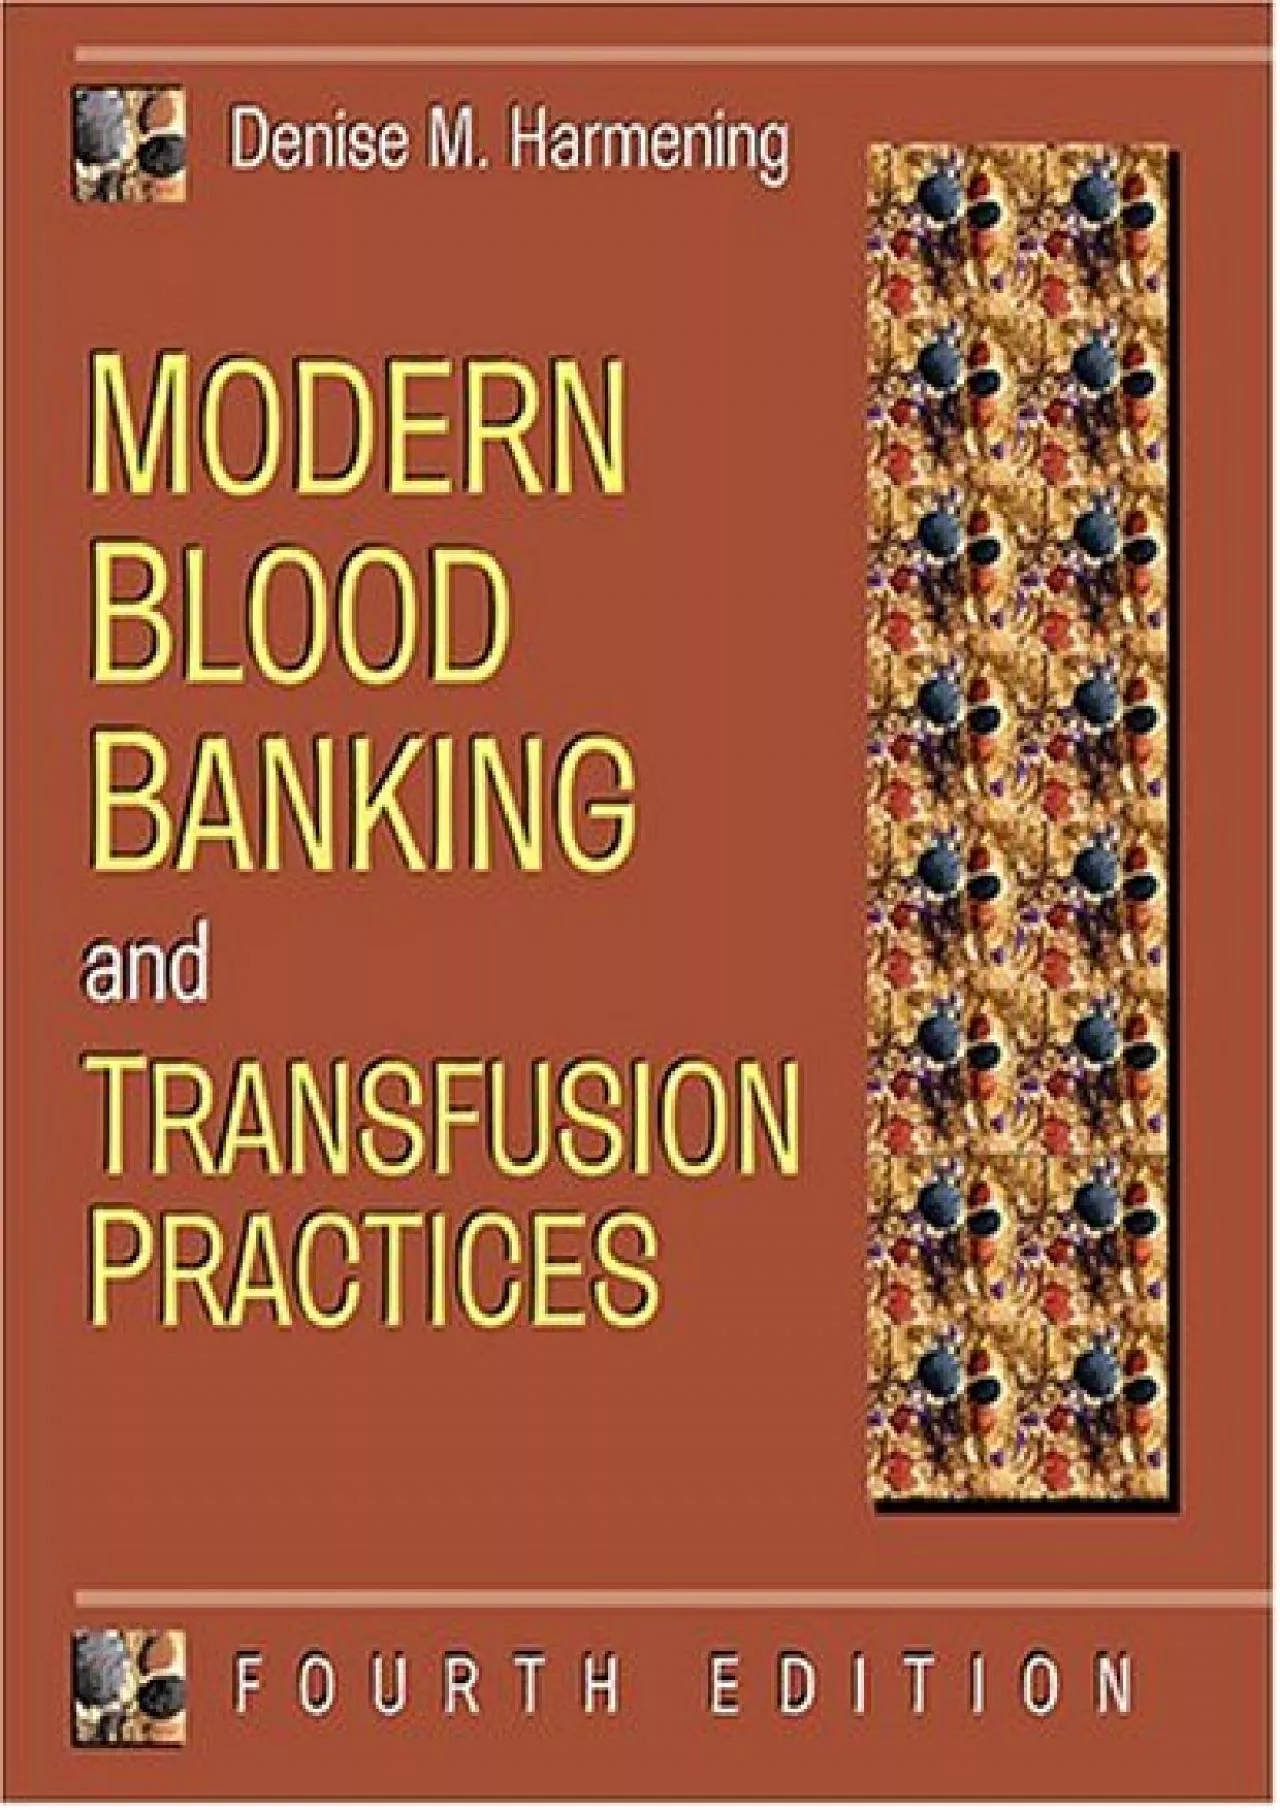 (BOOK)-Modern Blood Banking and Transfusion Practices